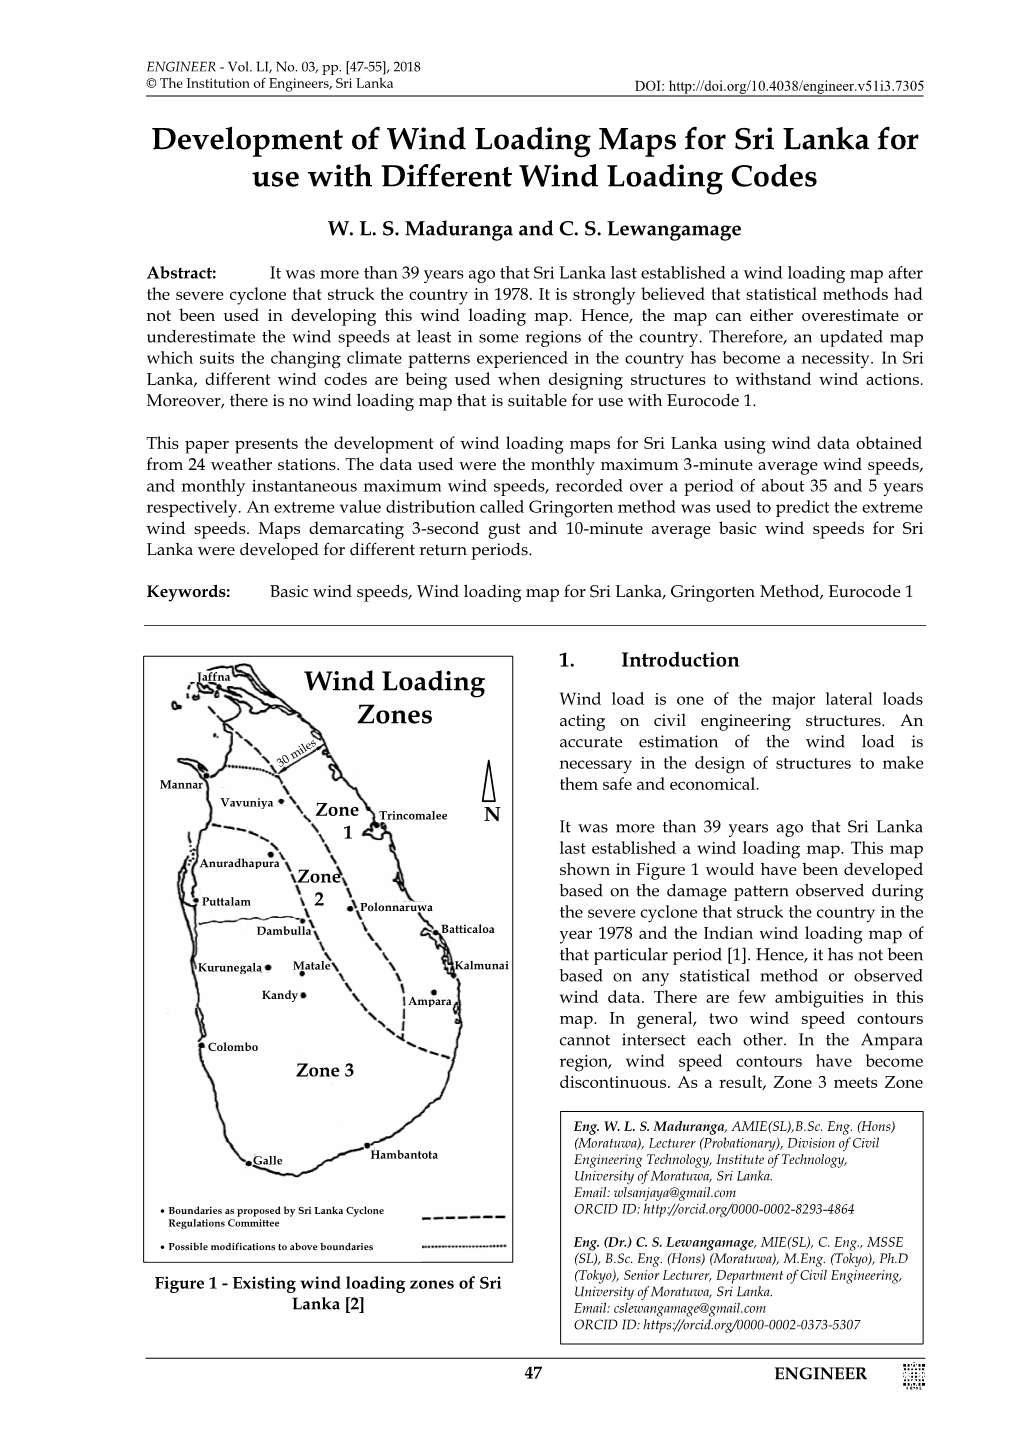 Development of Wind Loading Maps for Sri Lanka for Use with Different Wind Loading Codes